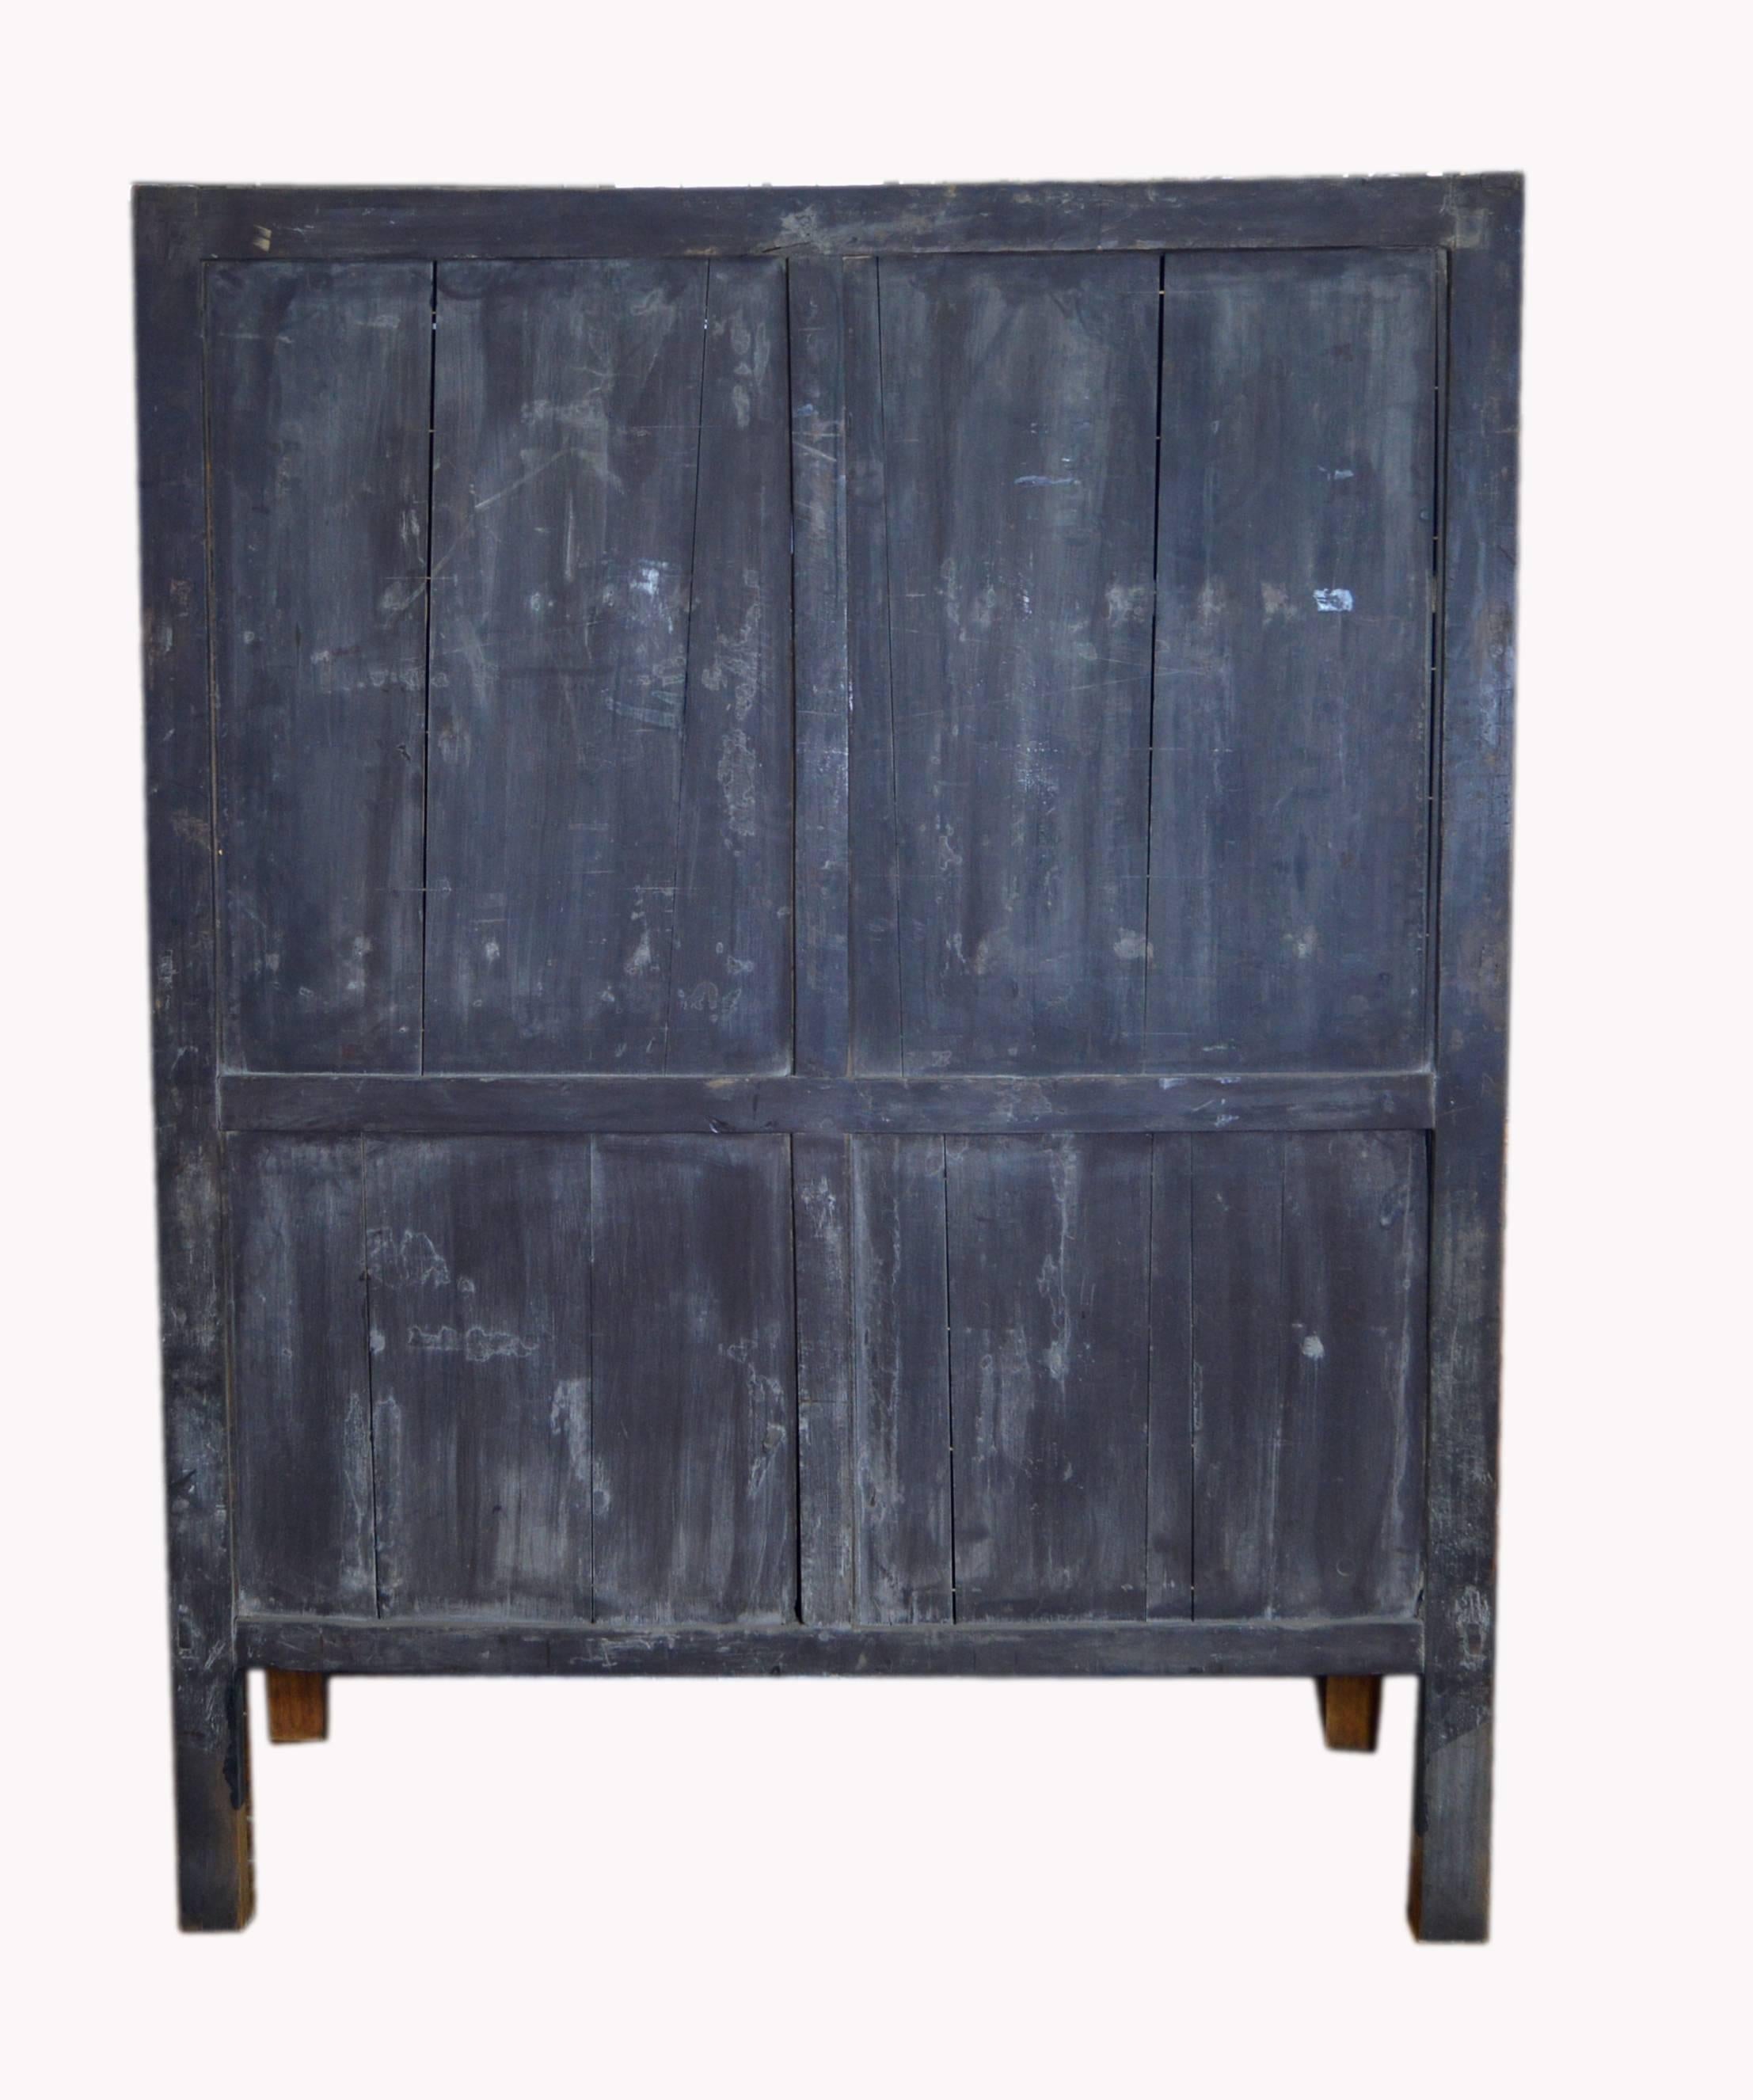 Wood Antique Chinese Lacquered Cabinet with Doors, Drawers and Brass Hardware For Sale